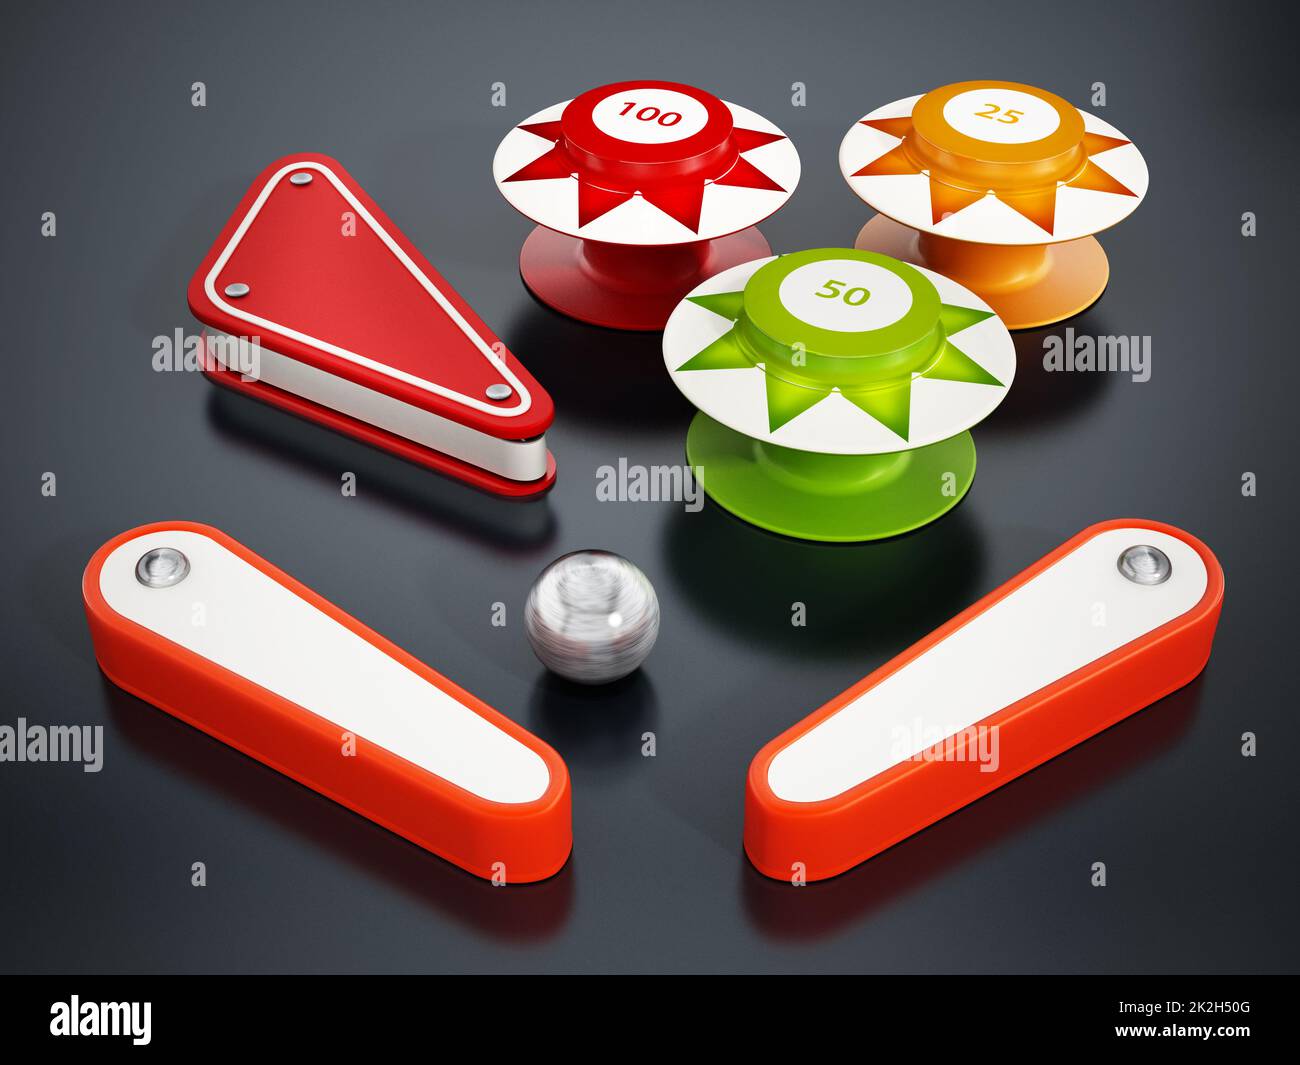 Pinball bumpers, flippers and metal ball on black background. 3D illustration Stock Photo